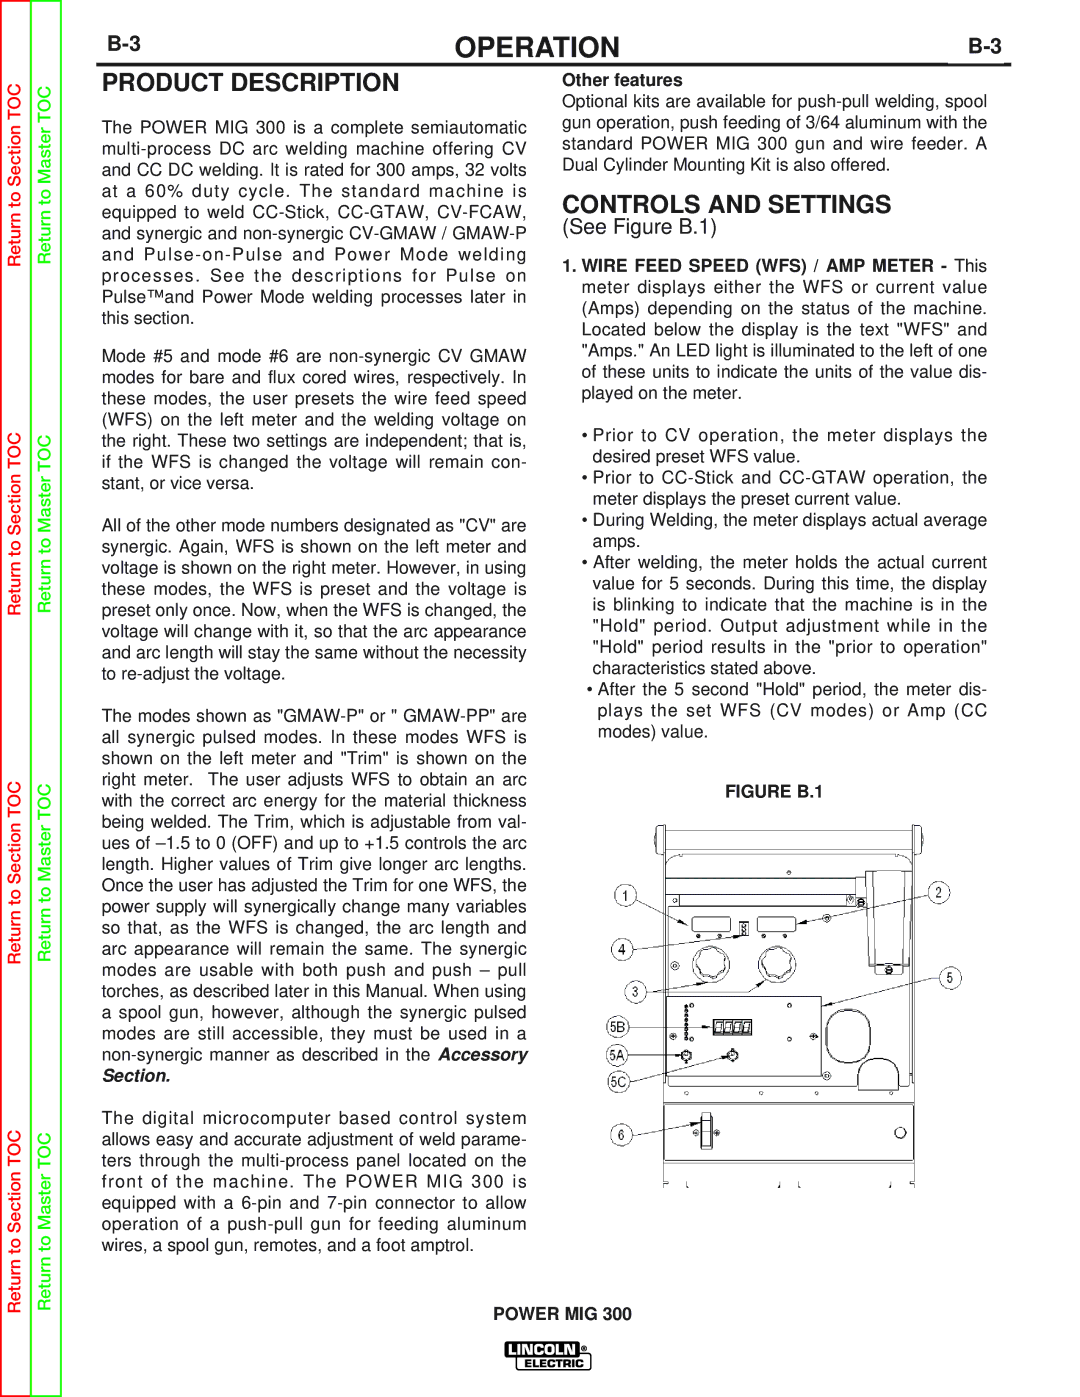 Lincoln Electric SVM160-B service manual Product Description, Controls and Settings, Other features 